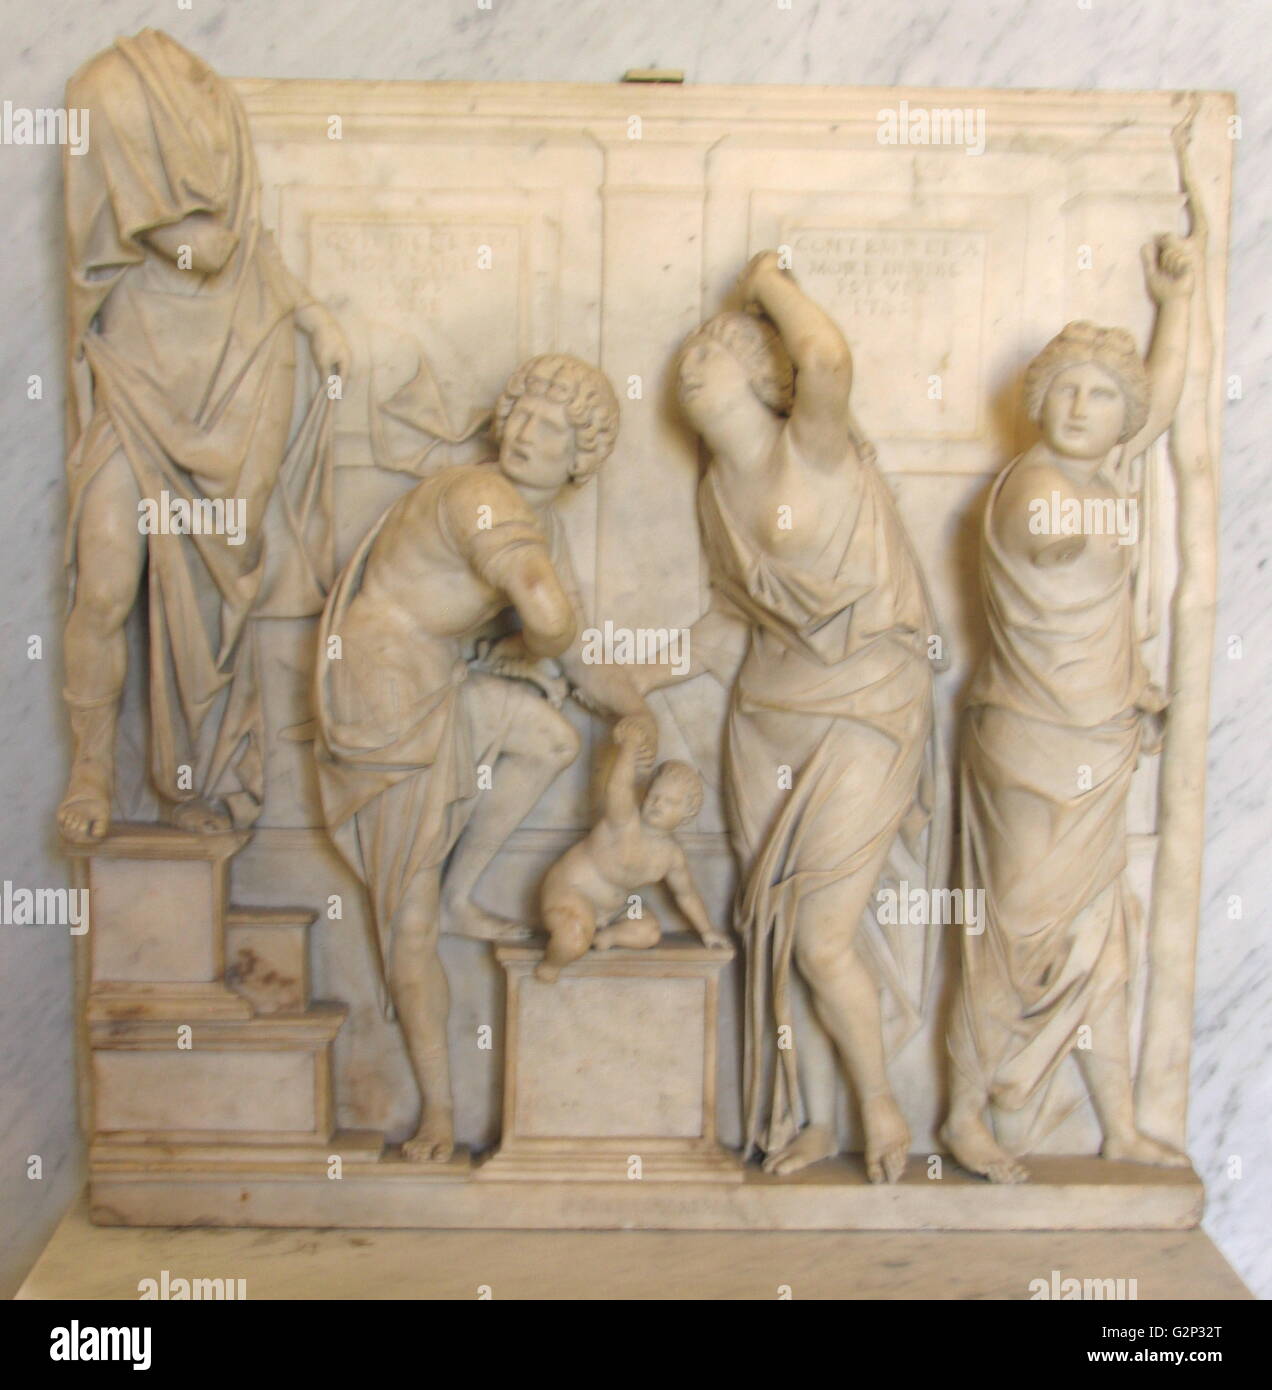 Relief in Marble, 'Le Jugement de Salomon'. Circa 1516-1529 By Italian sculptor Giovanni Maria Mosca. One of his earliest documented works. Completed during his time in Padua as a commission for Giovanni d'Antonio Minello. Stock Photo